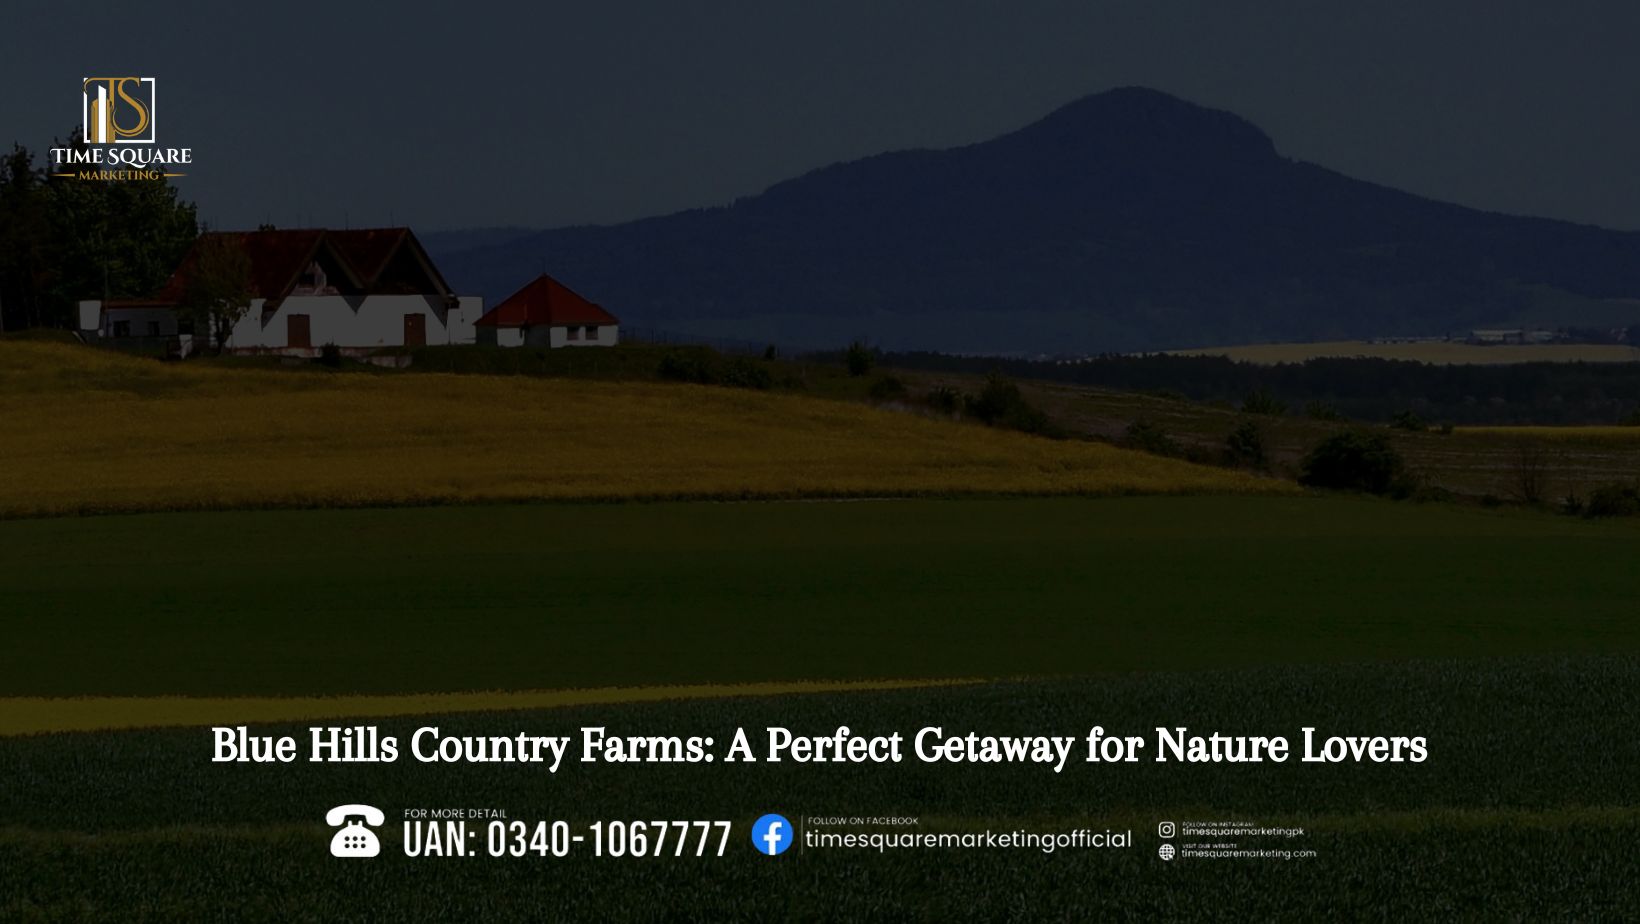 Blue Hills Country Farms: A Perfect Getaway for Nature Lovers